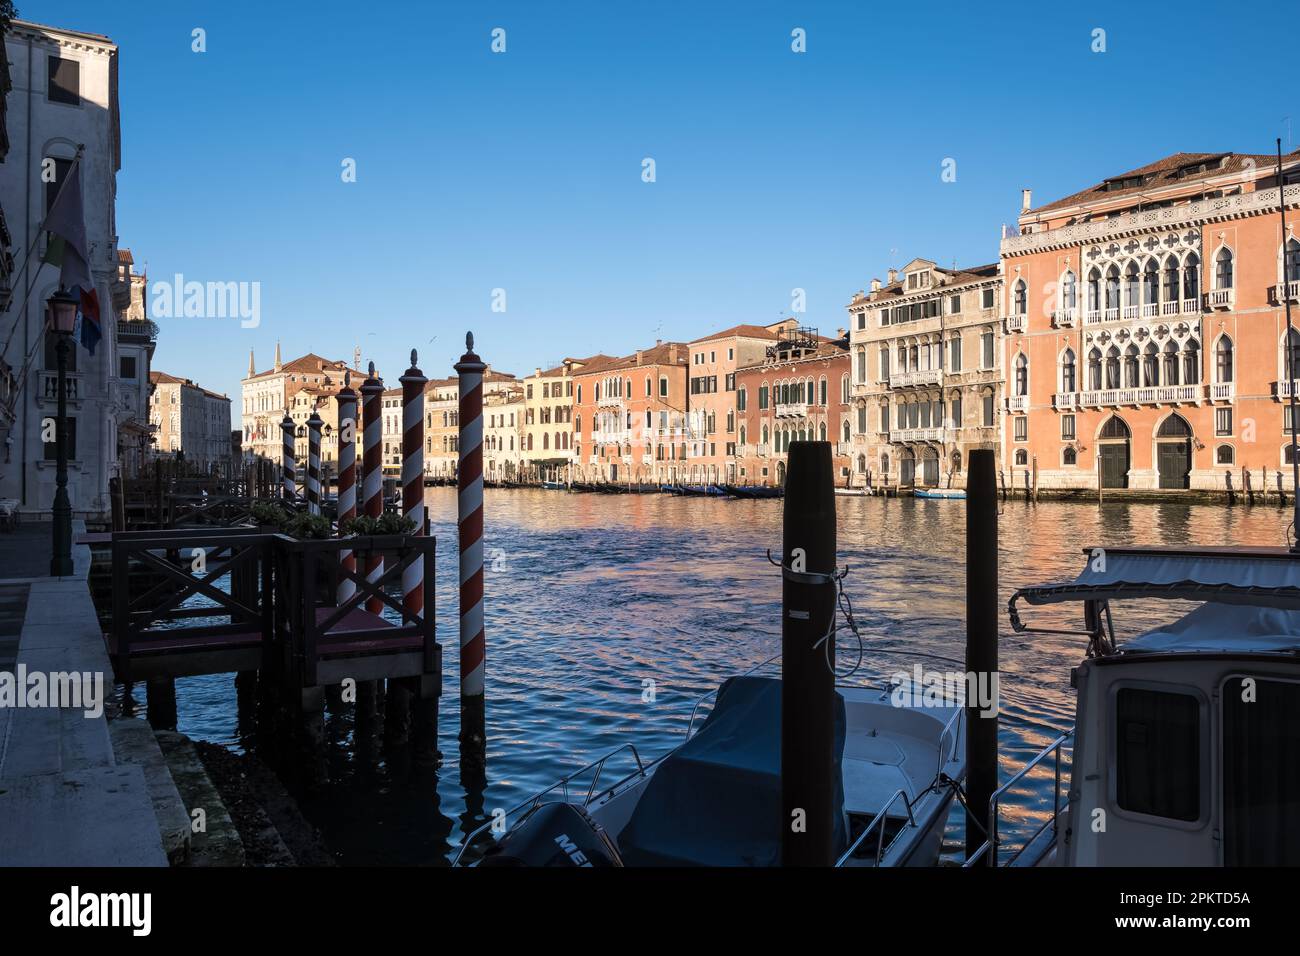 View of the Grand Canal, a channel in Venice, Italy, that forms one of the major water-traffic corridors through the central districts of the city Stock Photo